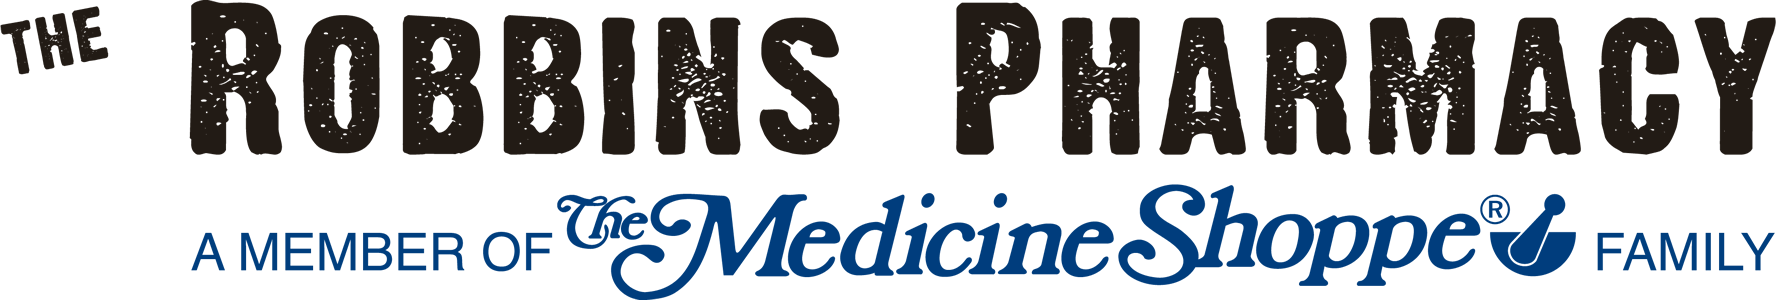 Medicine clipart medication management. The robbins pharmacy msi